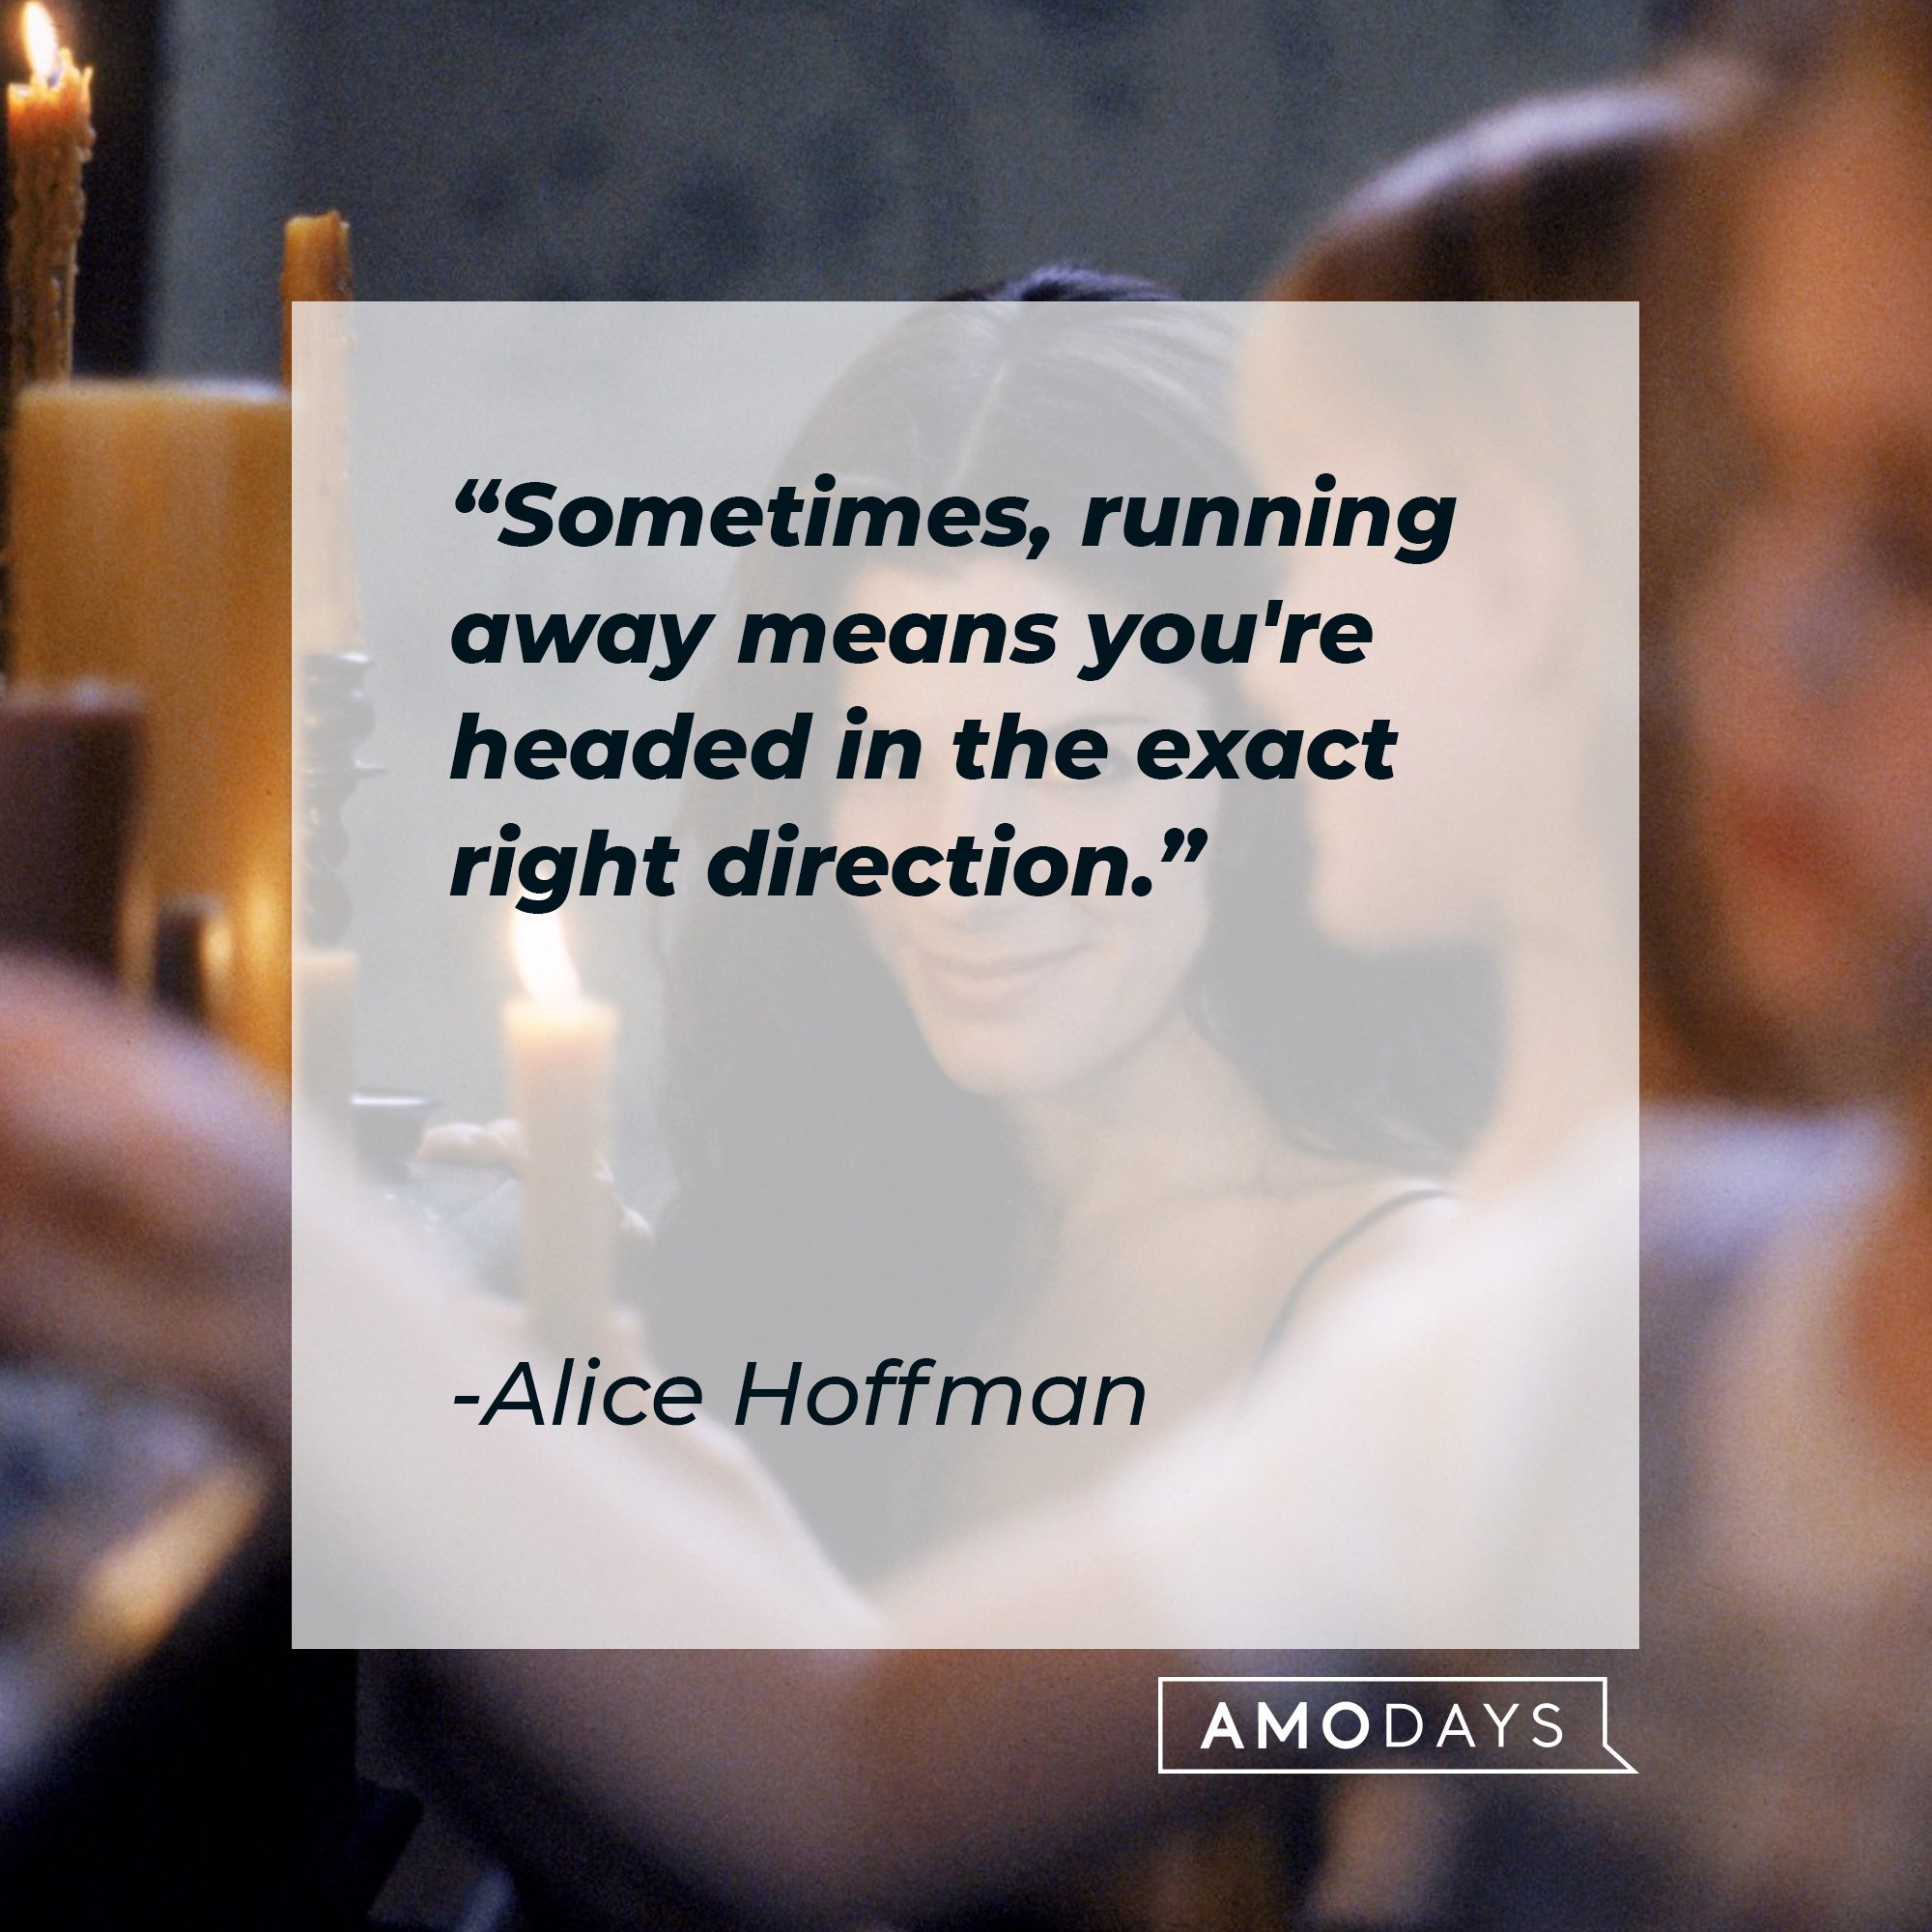   Alice Hoffman’s quote: "Sometimes, running away means you're headed in the exact right direction.” | Image: AmoDays